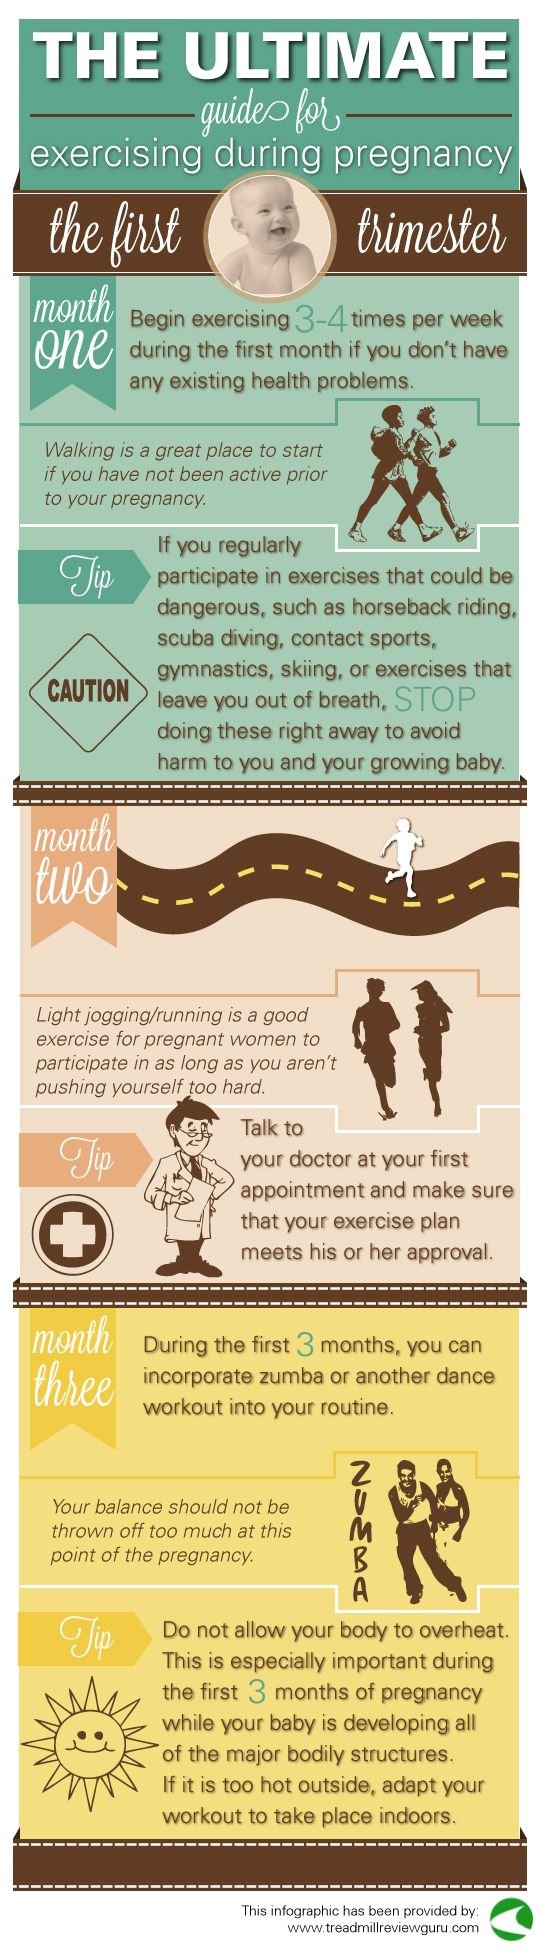 ultimate guide for exercising during pregnancy